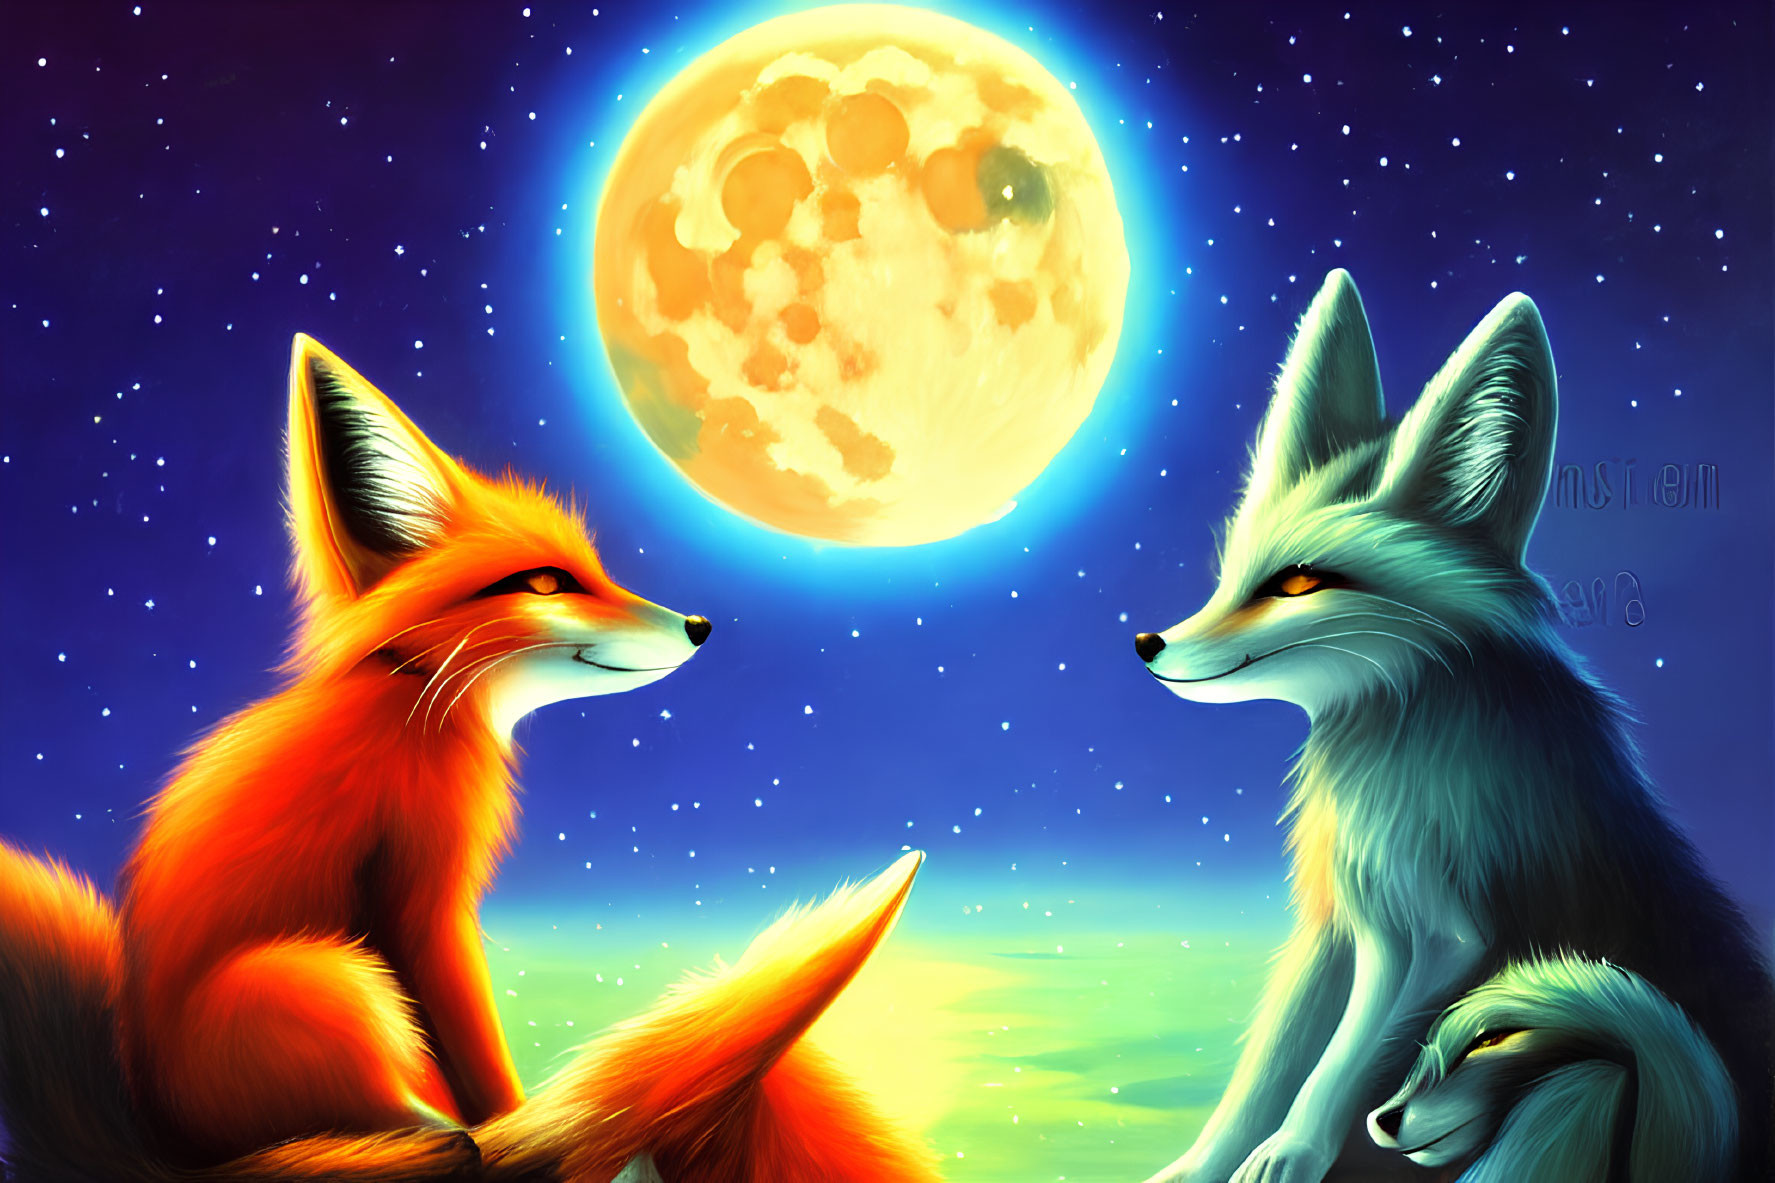 Stylized foxes under a full moon in vibrant colors